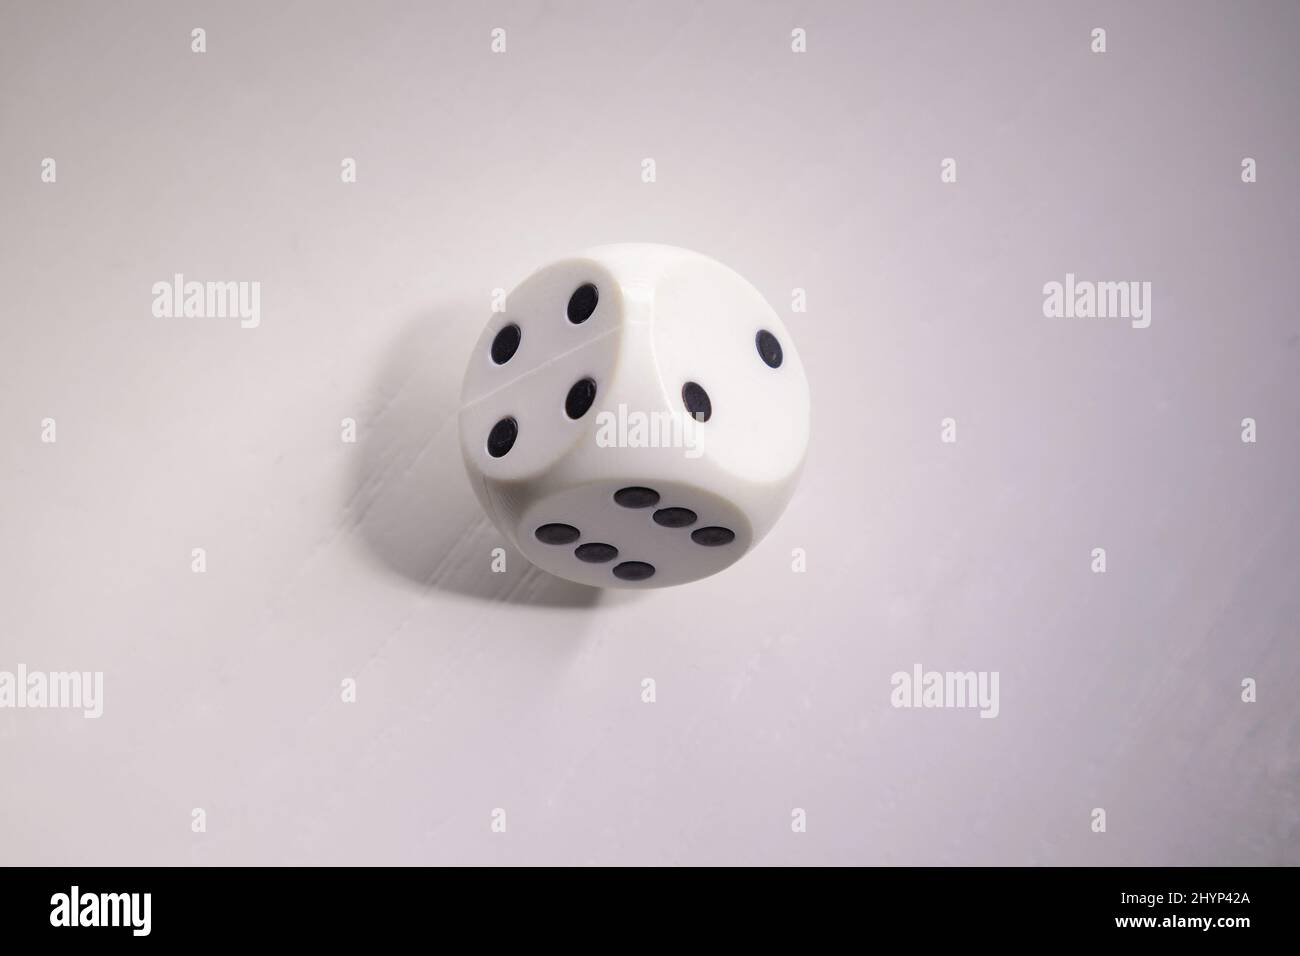 Details of gambling cube on white wooden table, it is not clear what will be the result. Stock Photo